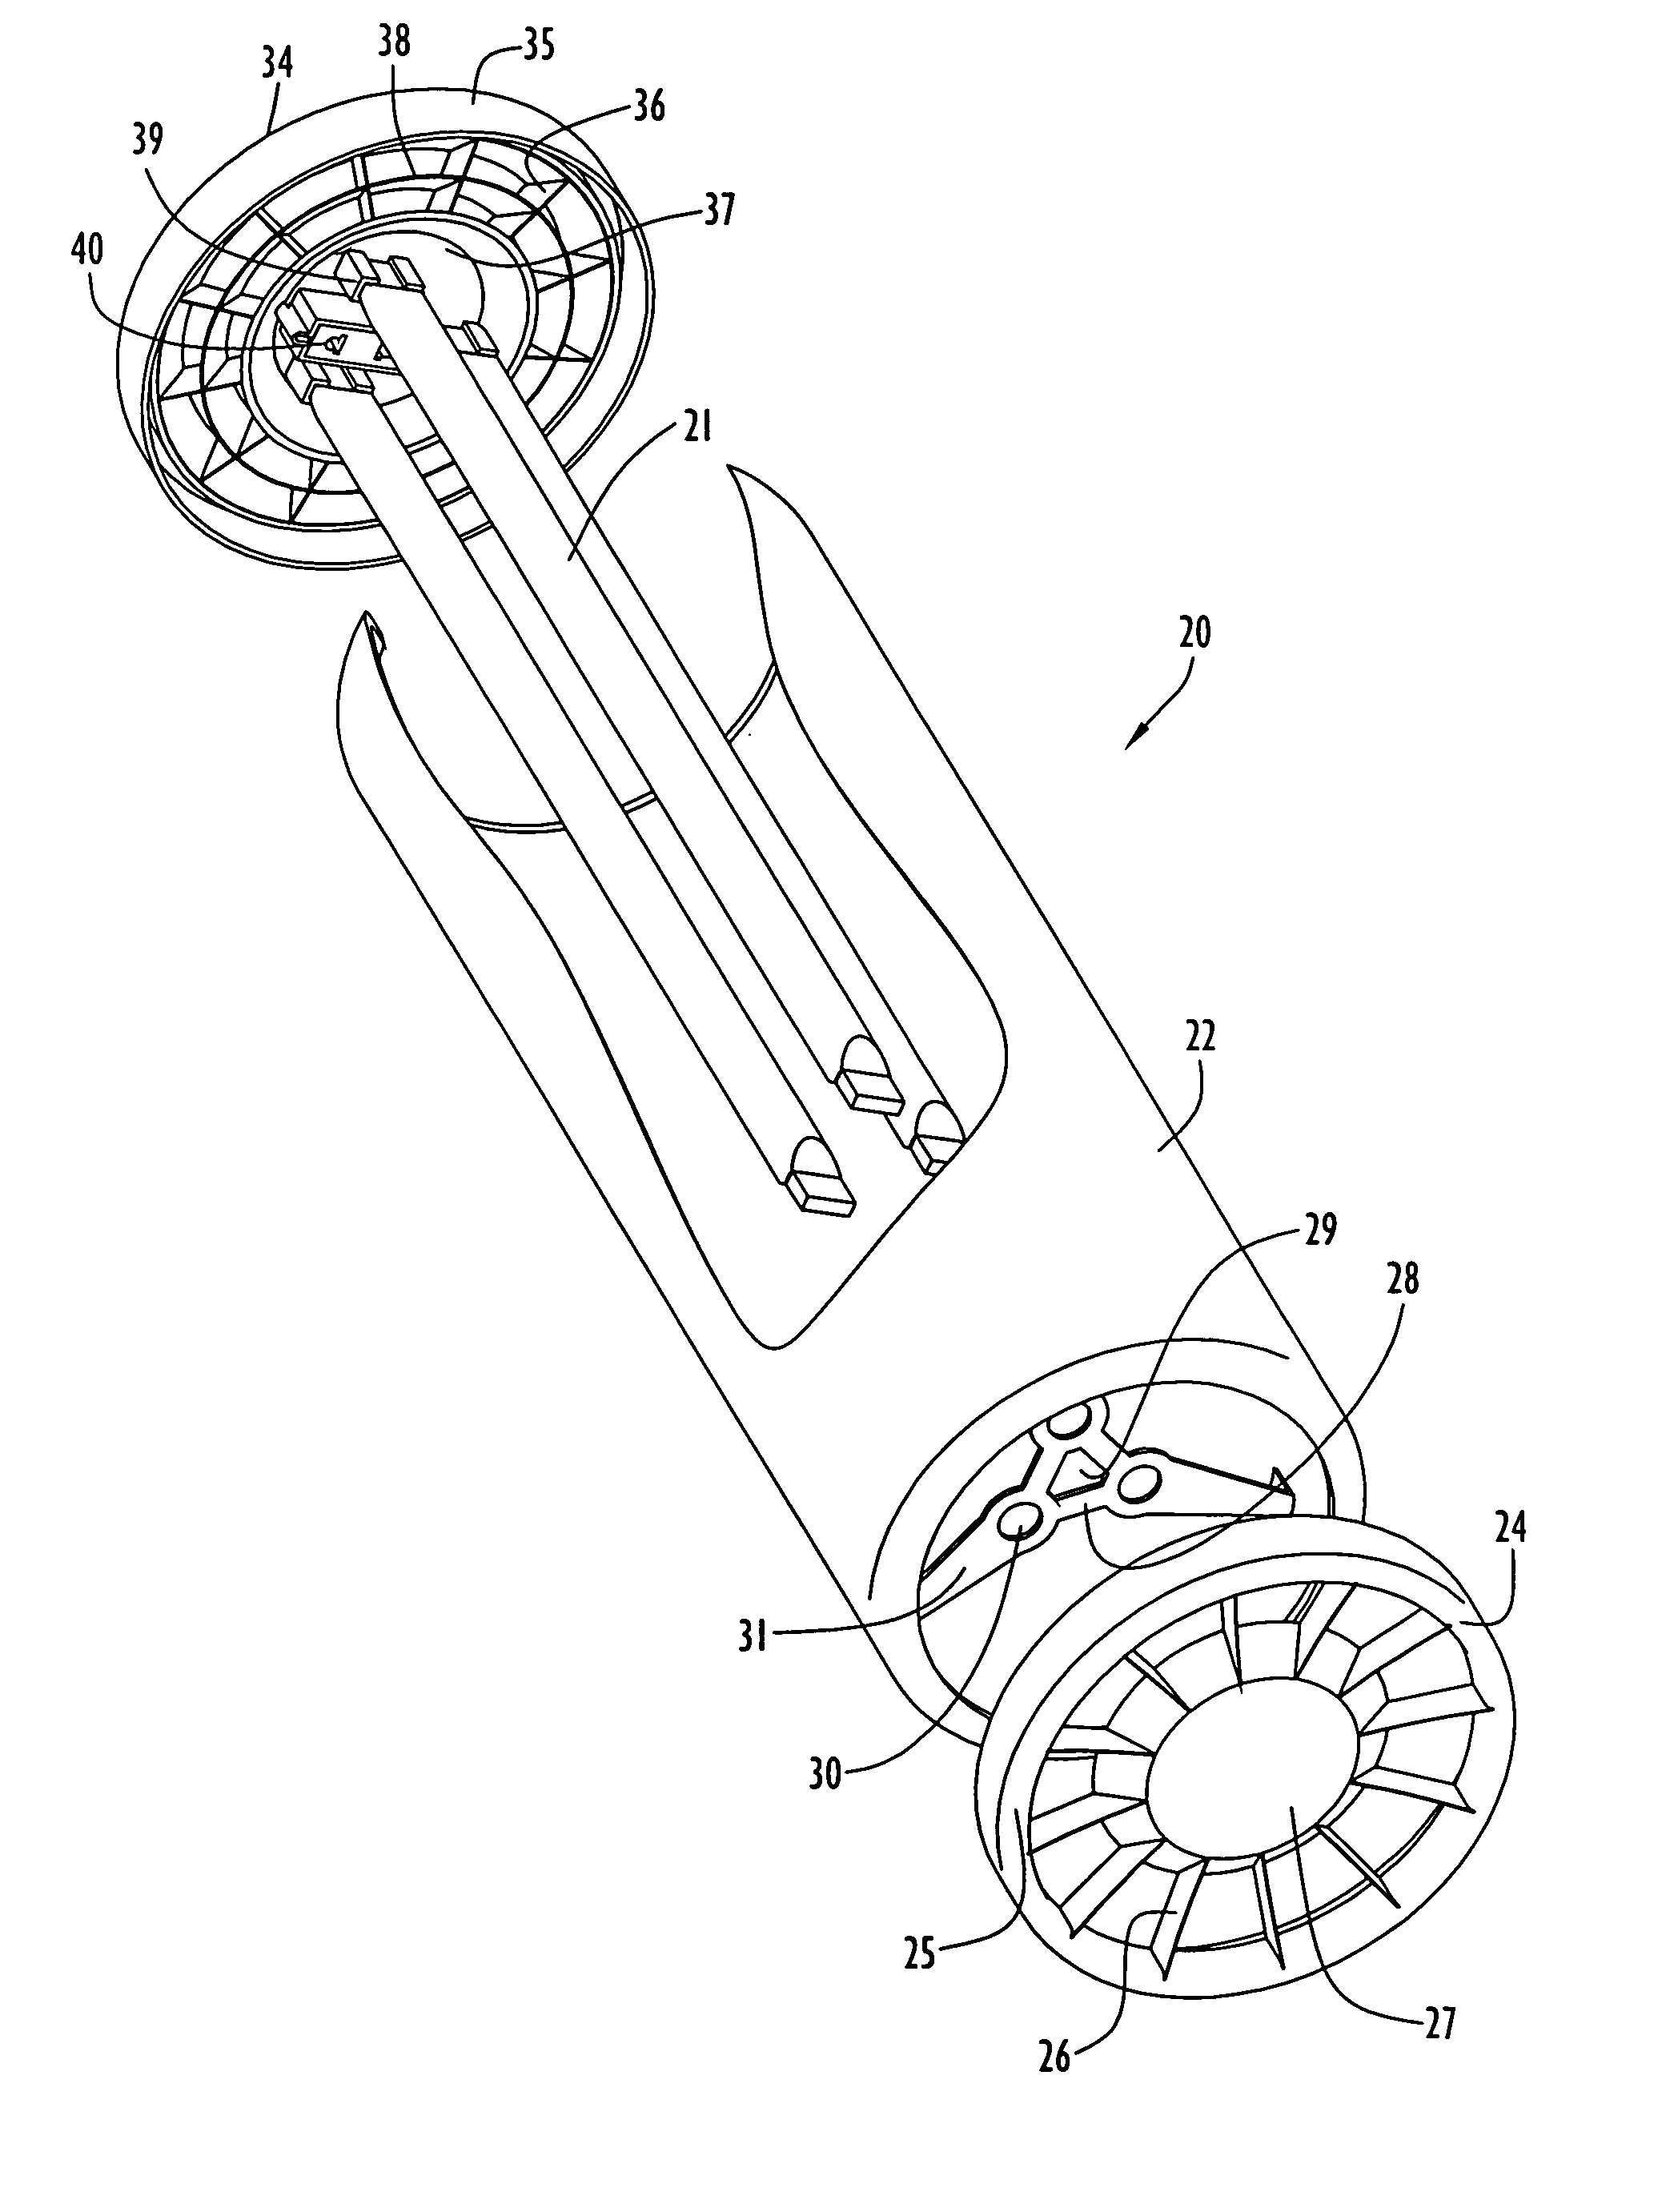 System for purifying and removing contaminants from gaseous fluids